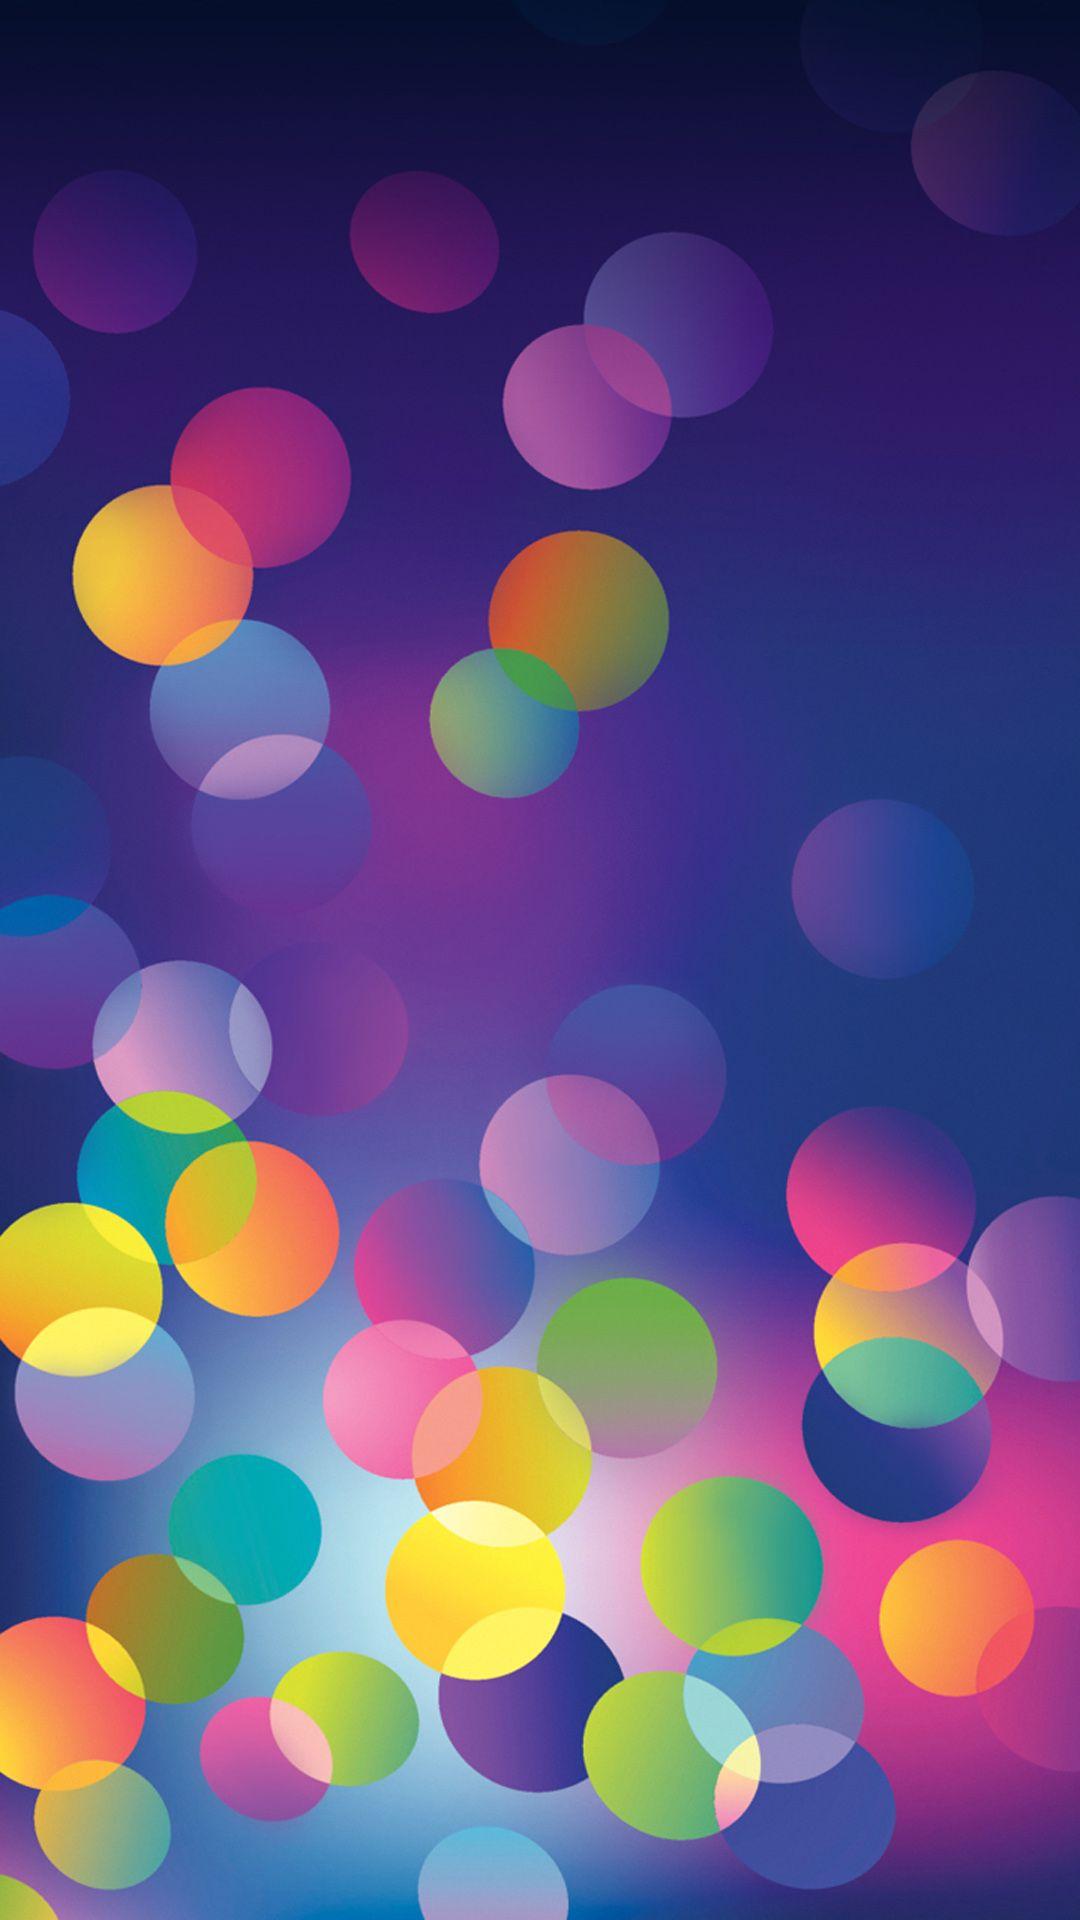 Colour Bubbles. IPhone wallpaper gradient abstract. Tap to discover